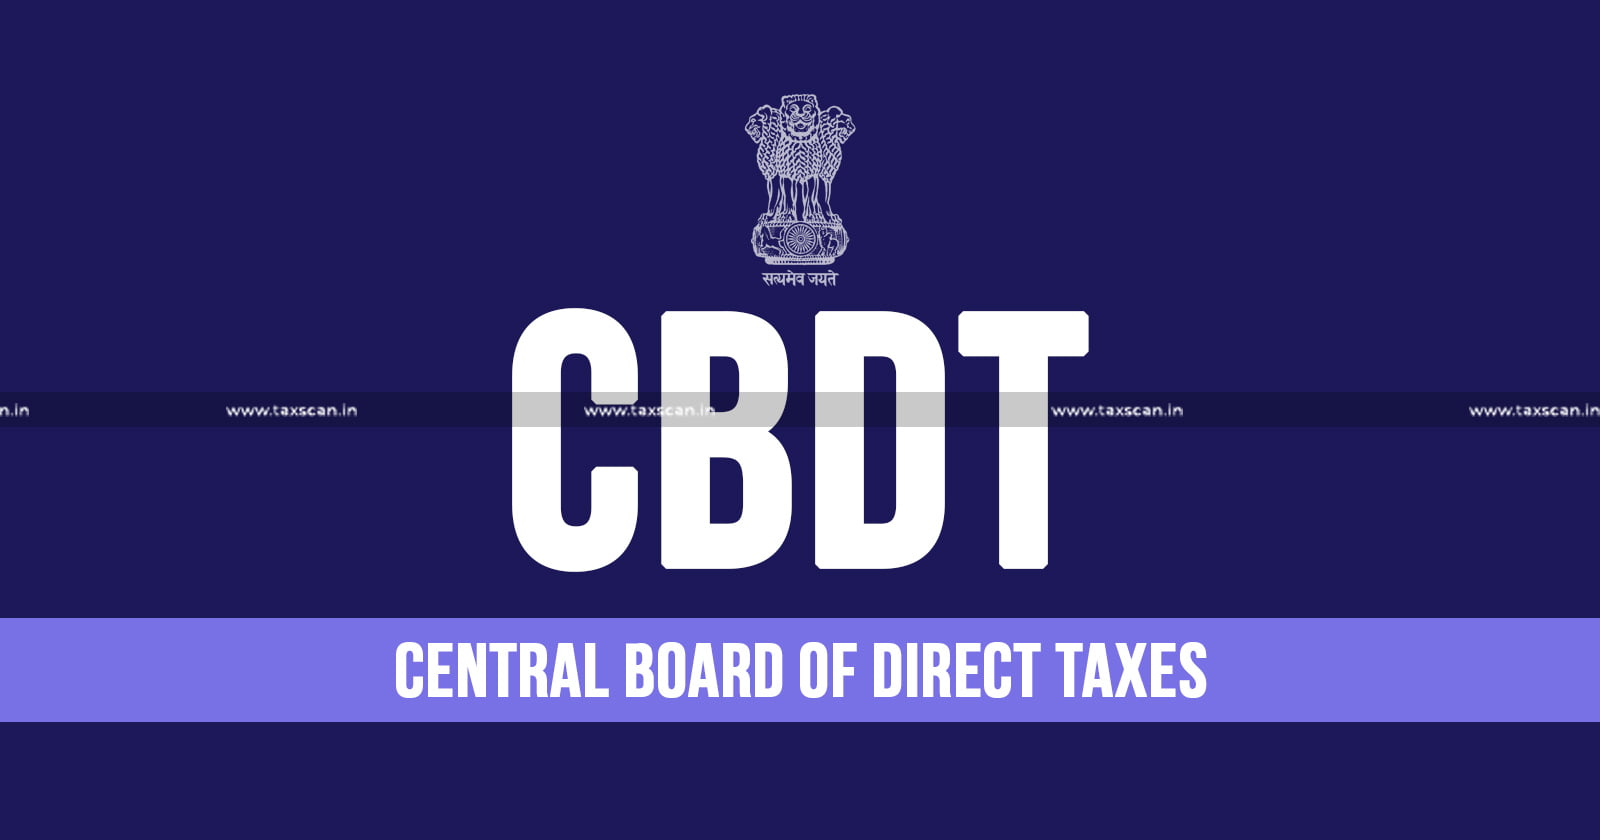 CBDT - Central Board of Direct Taxes - E-Filed ITRs - Refund Claims - CBDT ITR refund deadline extension - Taxscan